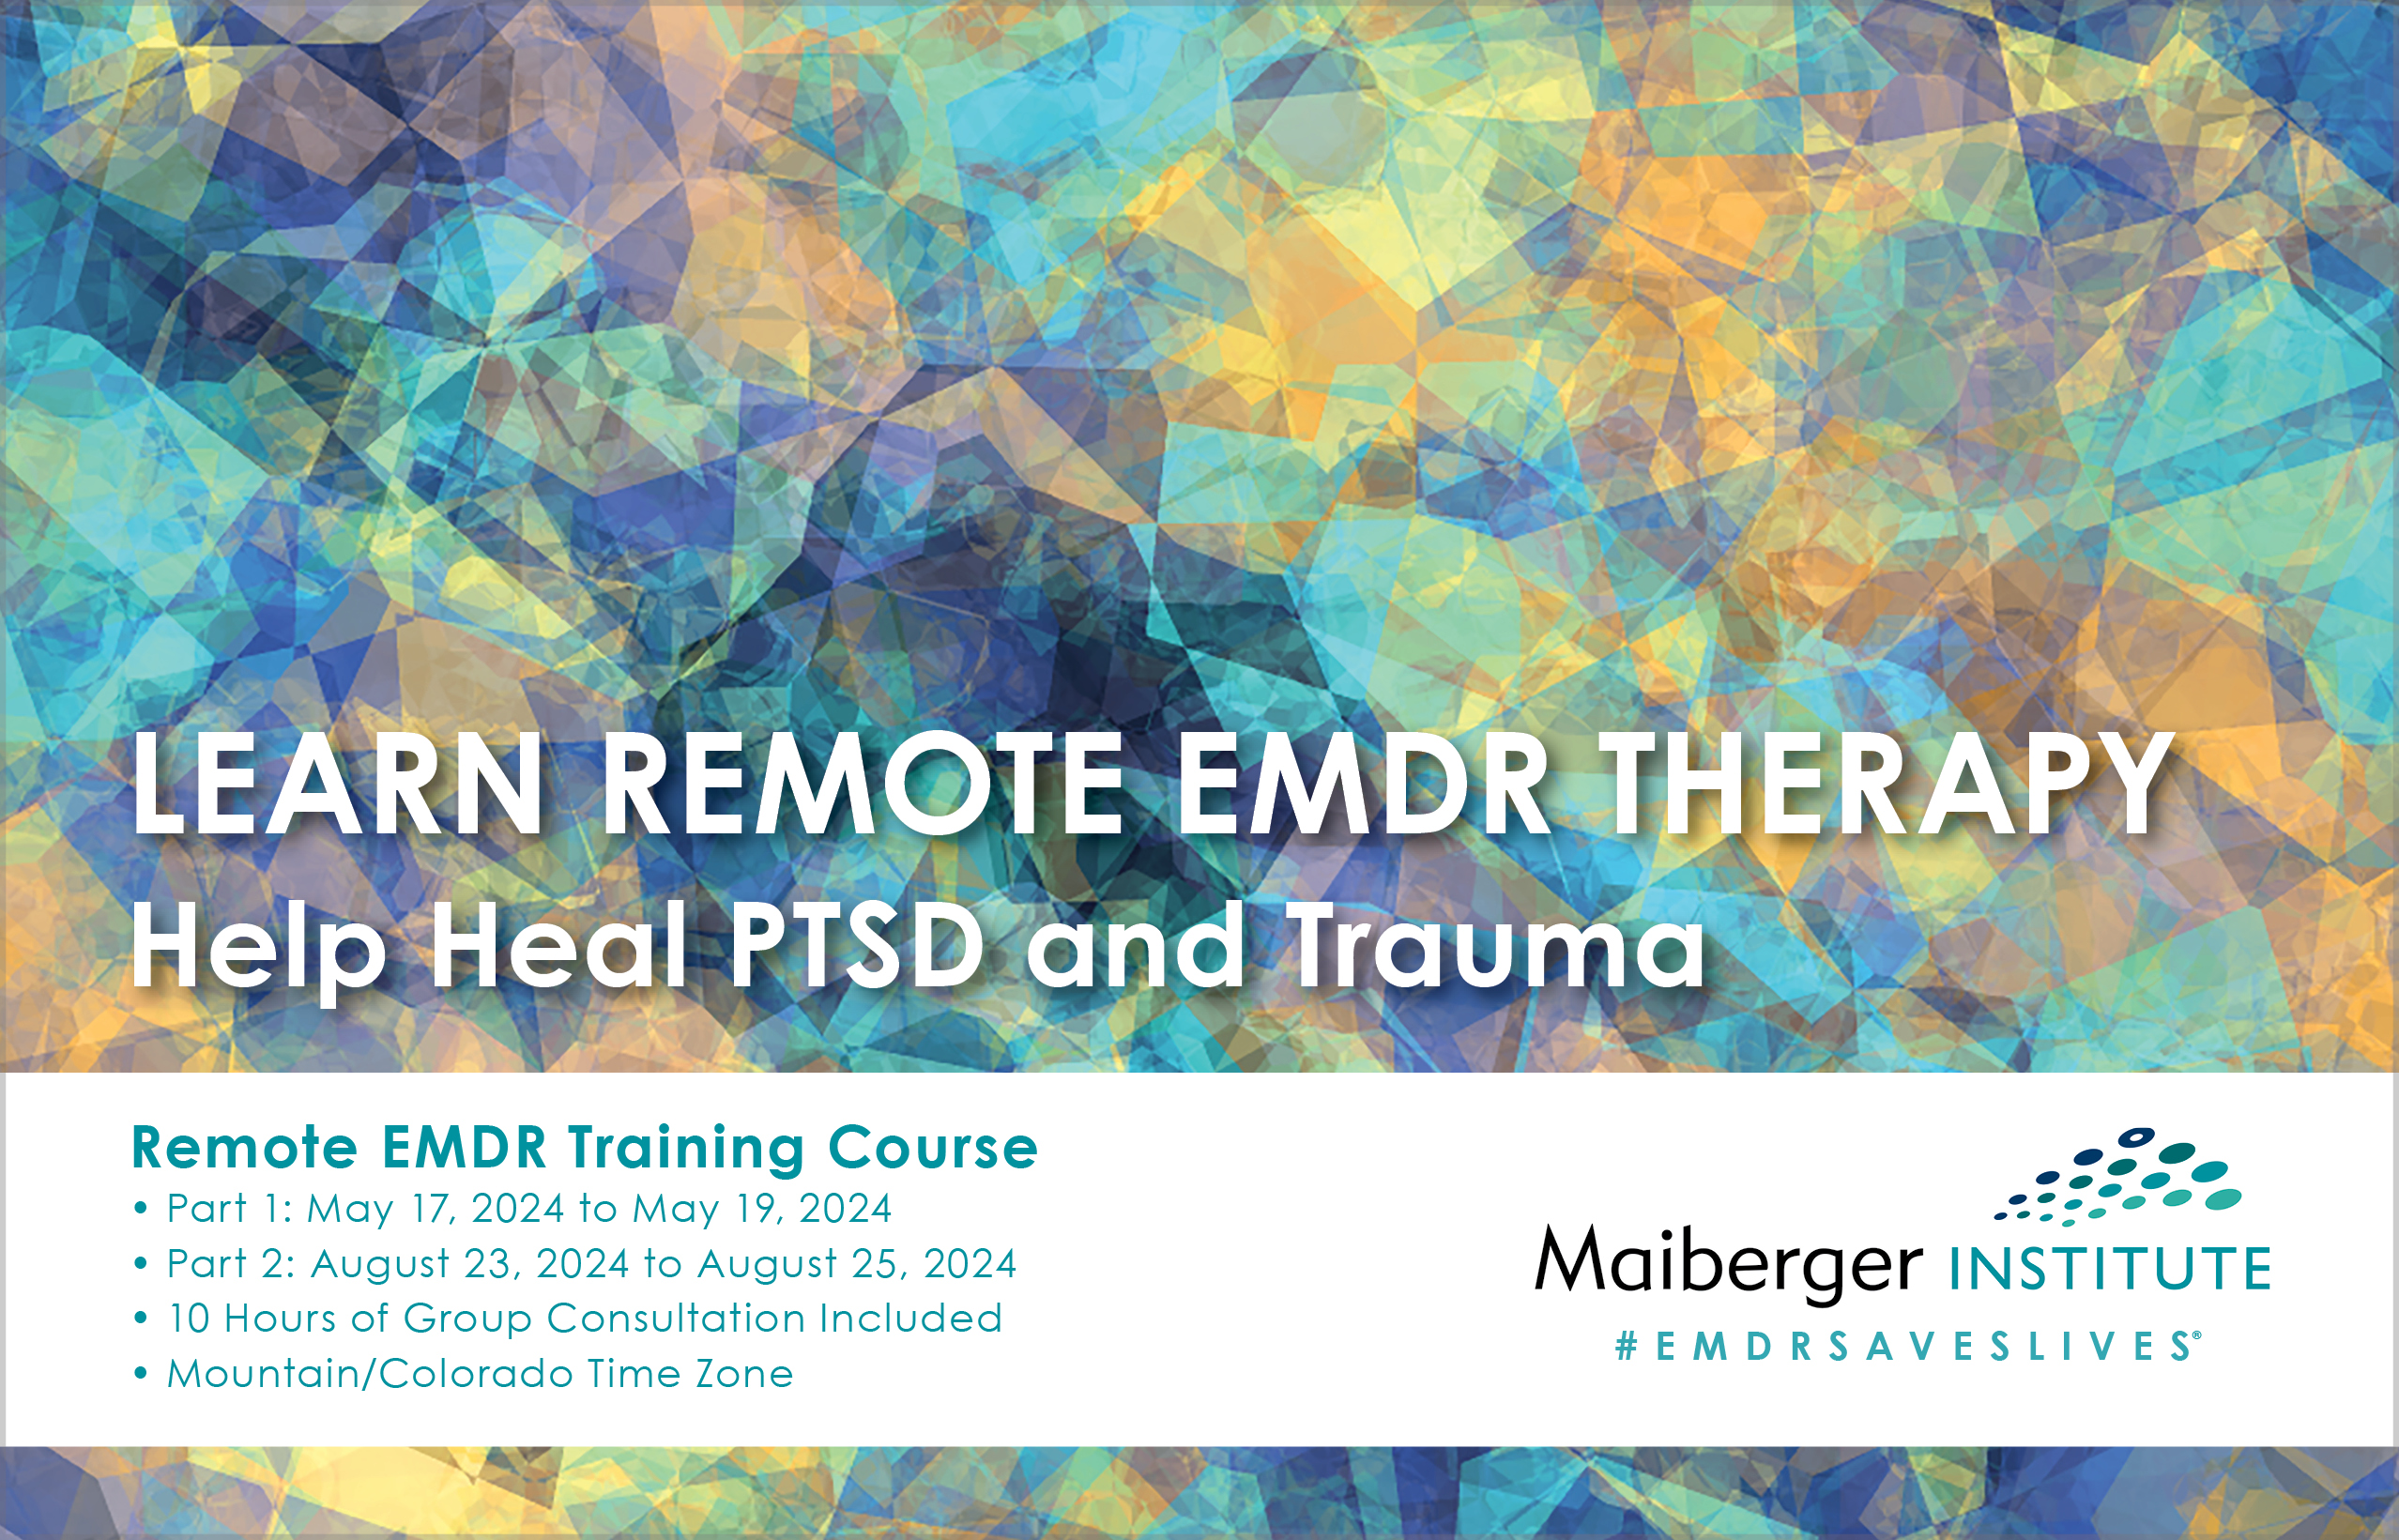 Complete Remote EMDR Training Course - May 2024 and August 2024 - Maiberger Institute - EMDR Training Schedule